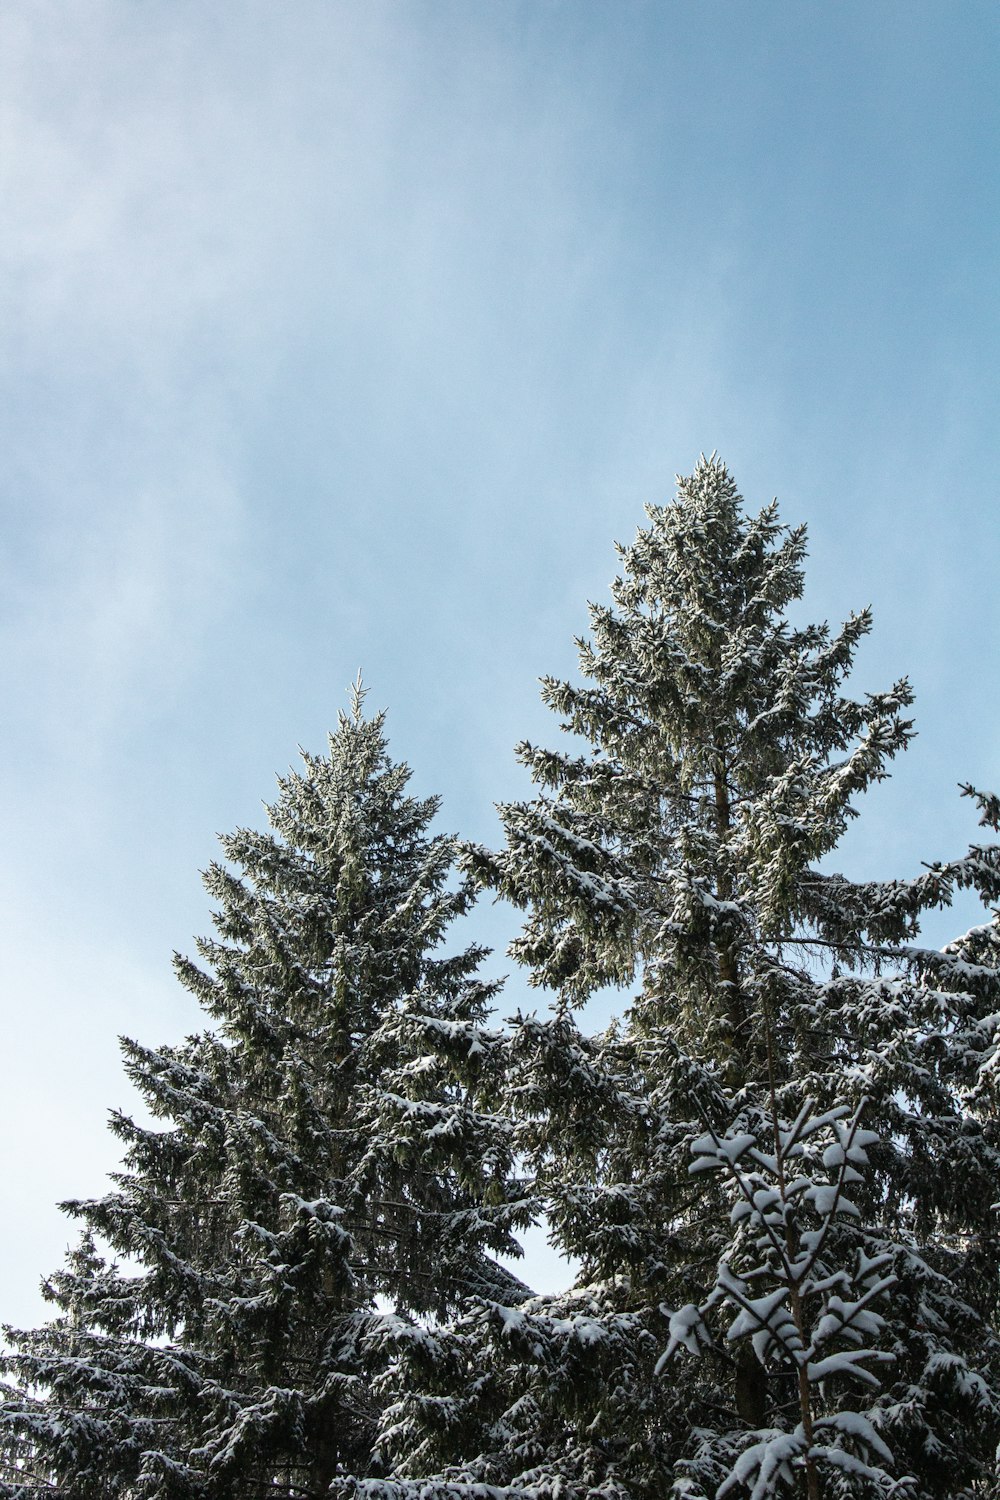 a group of trees covered in snow under a blue sky